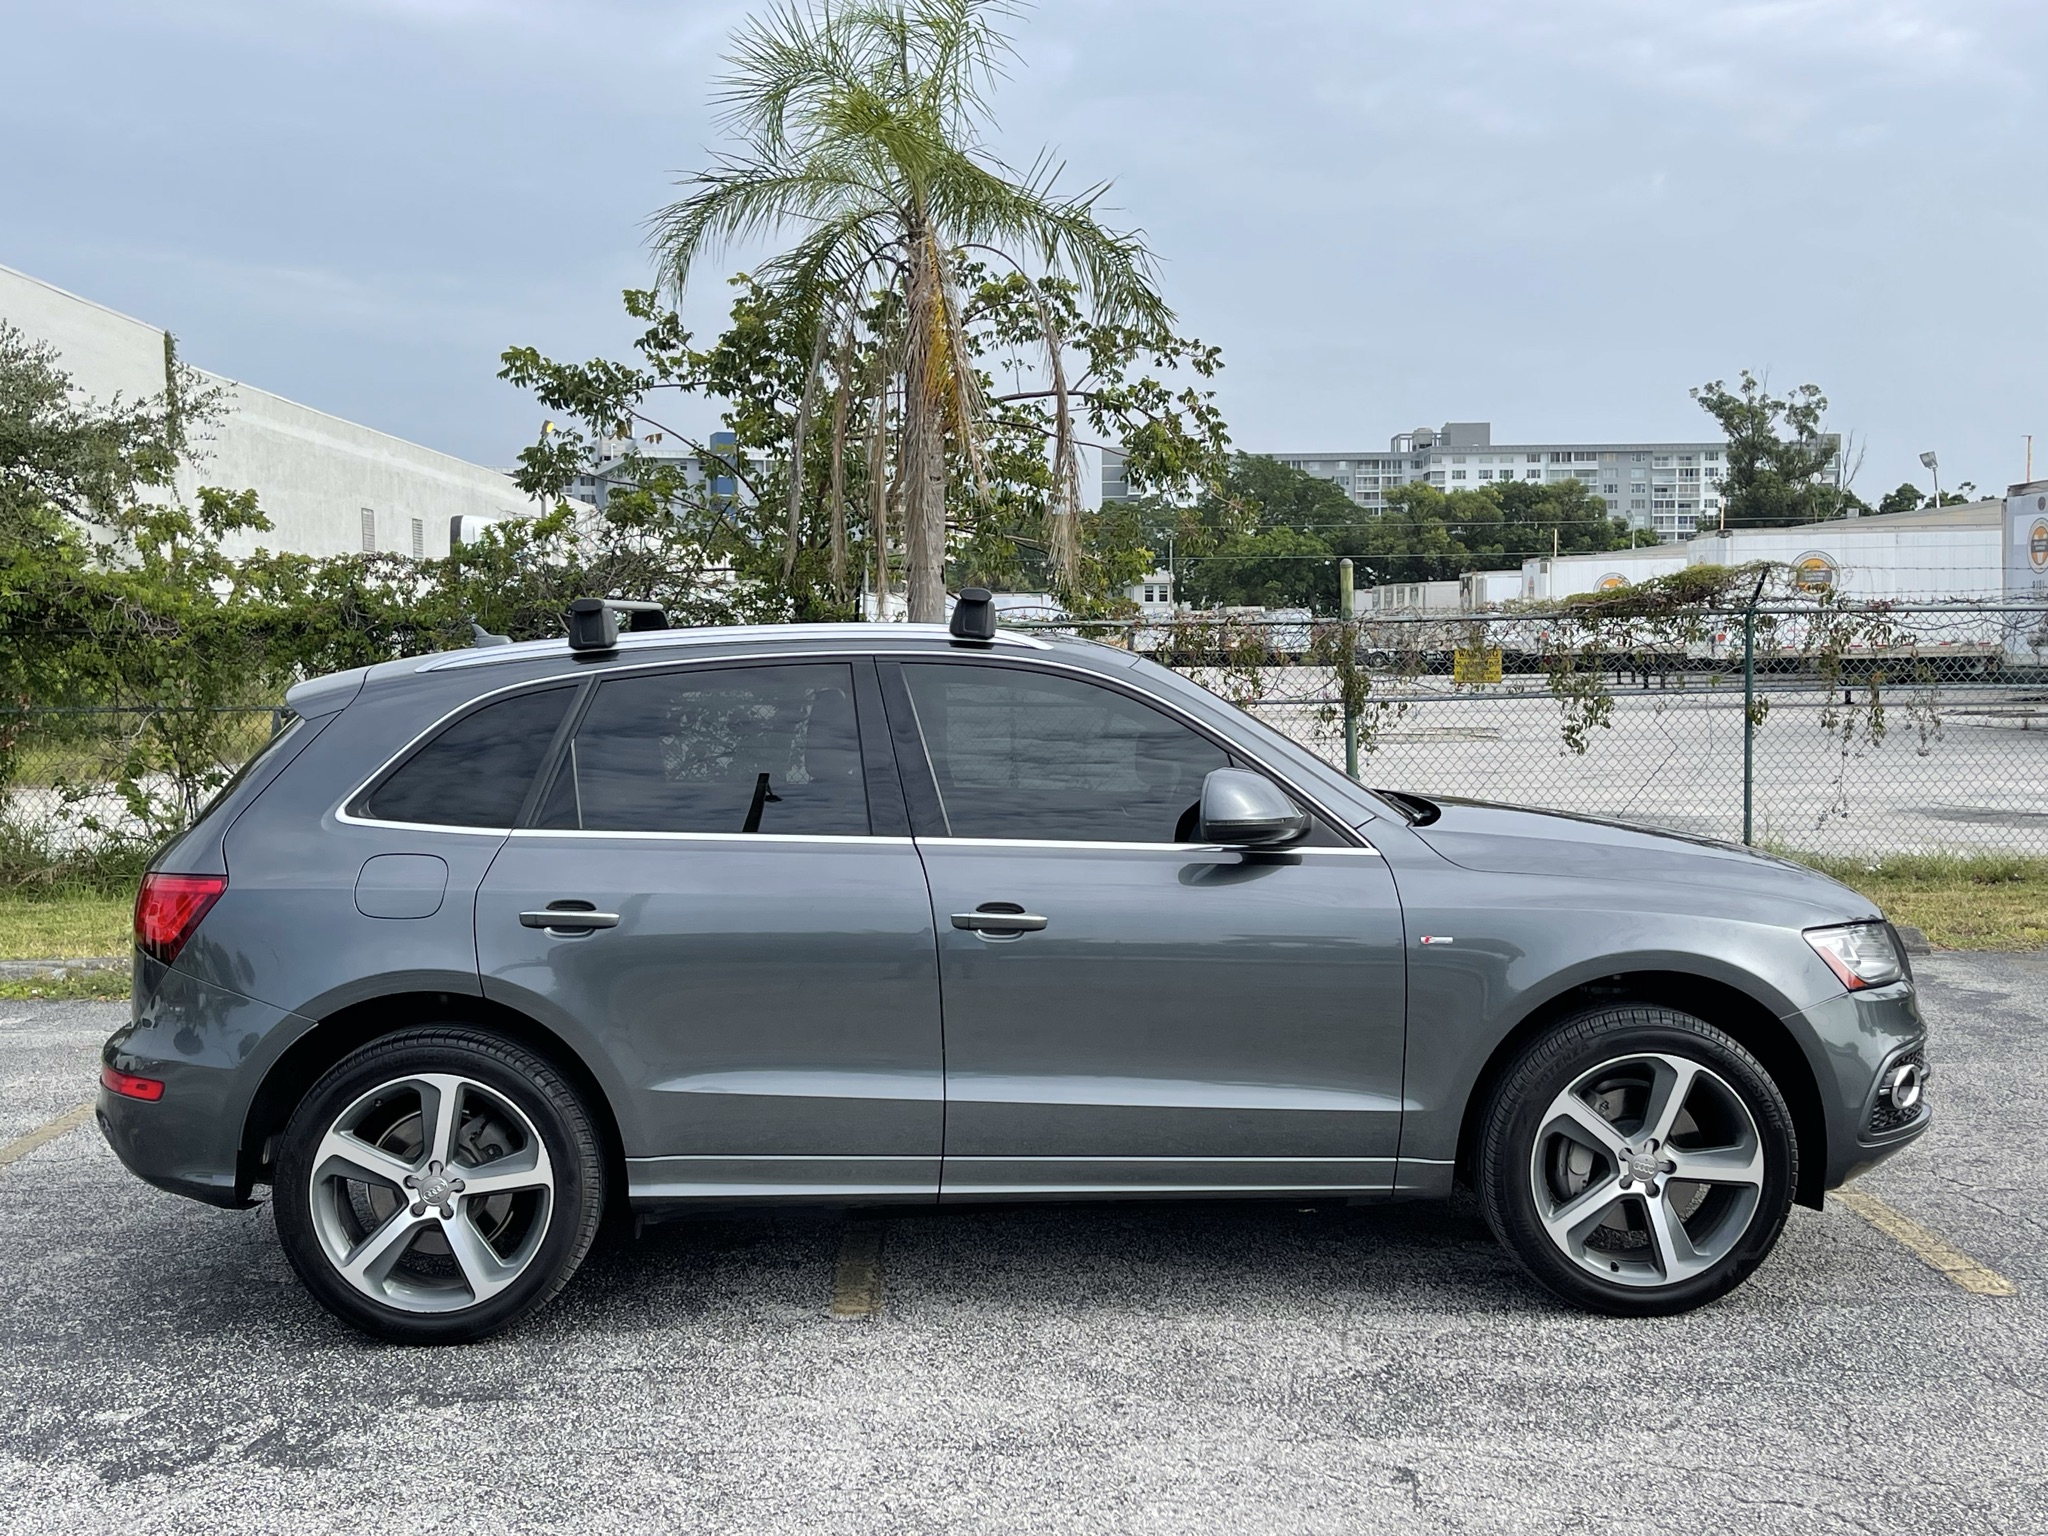 Buy Used 2015 AUDI Q5 3.0T QUATTRO PRESTIGE S-LINE for $24 900 from trusted  dealer in Brooklyn, NY!